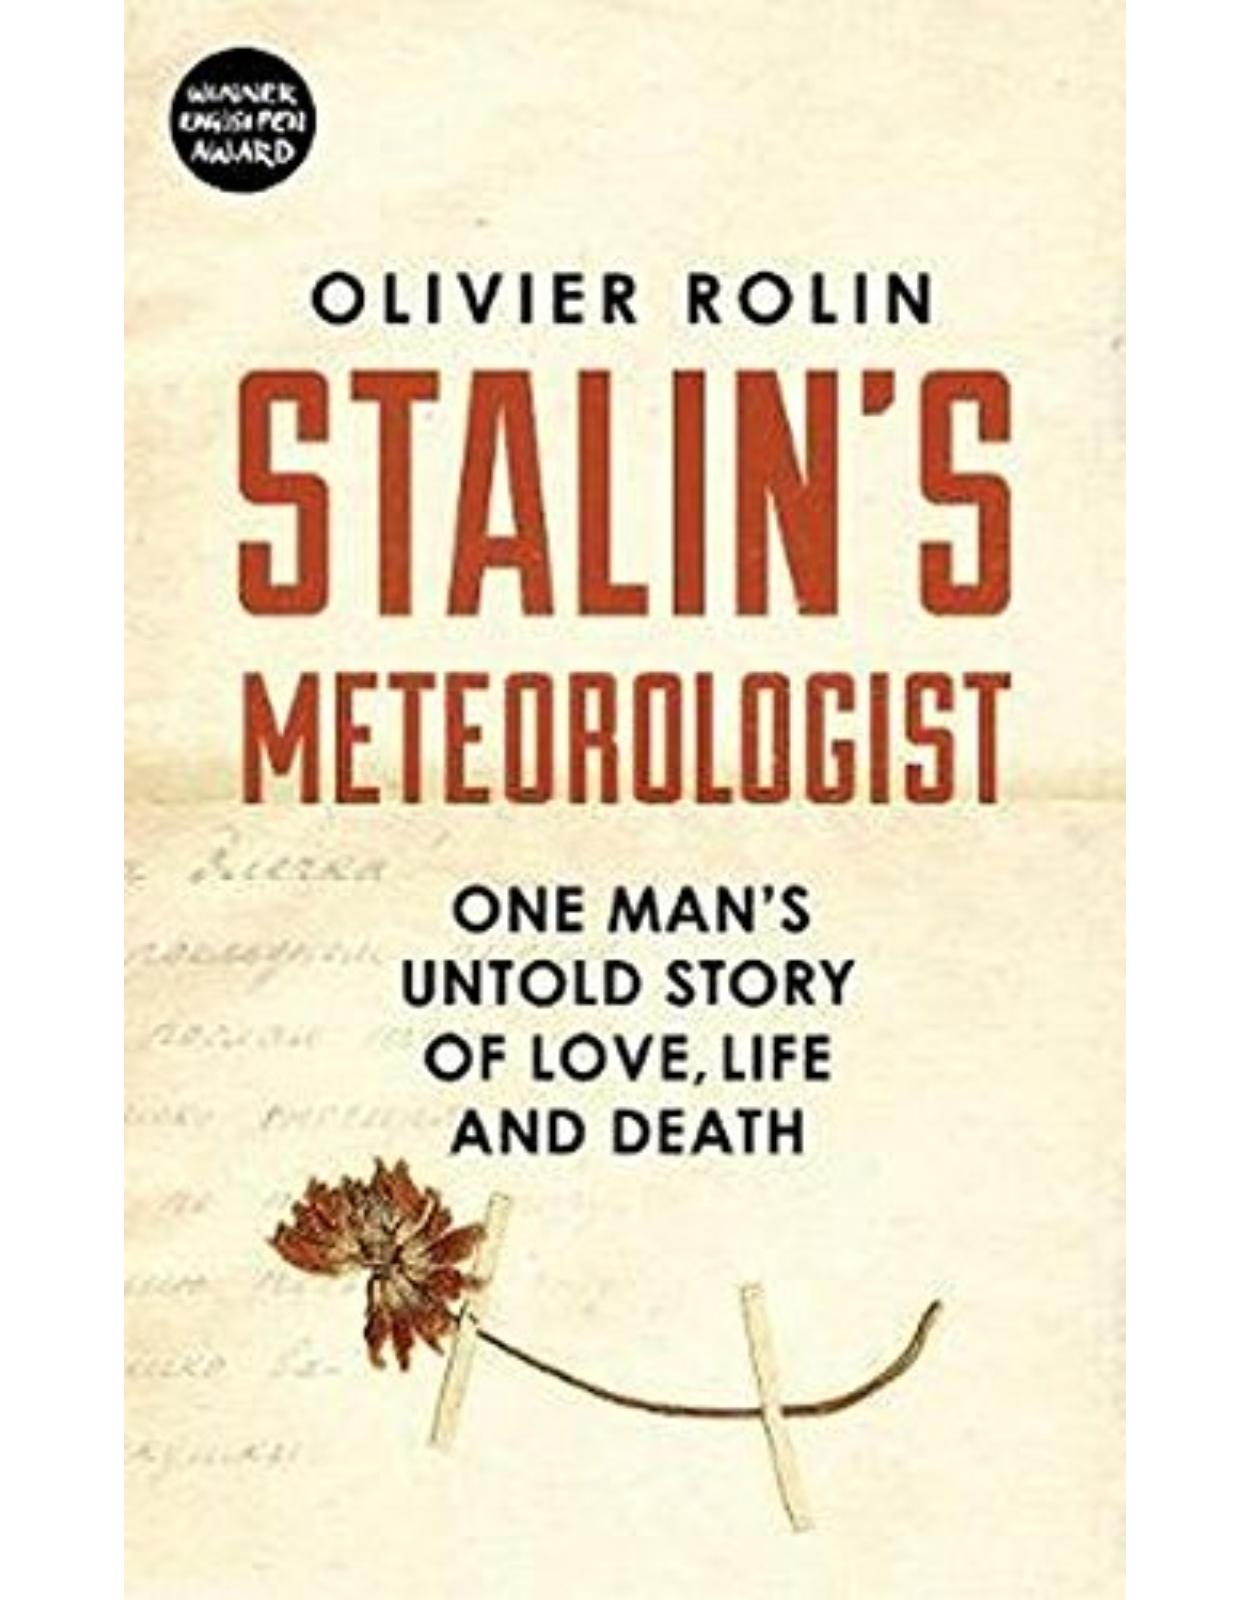 Stalin’s Meteorologist: One Man’s Untold Story of Love, Life and Death